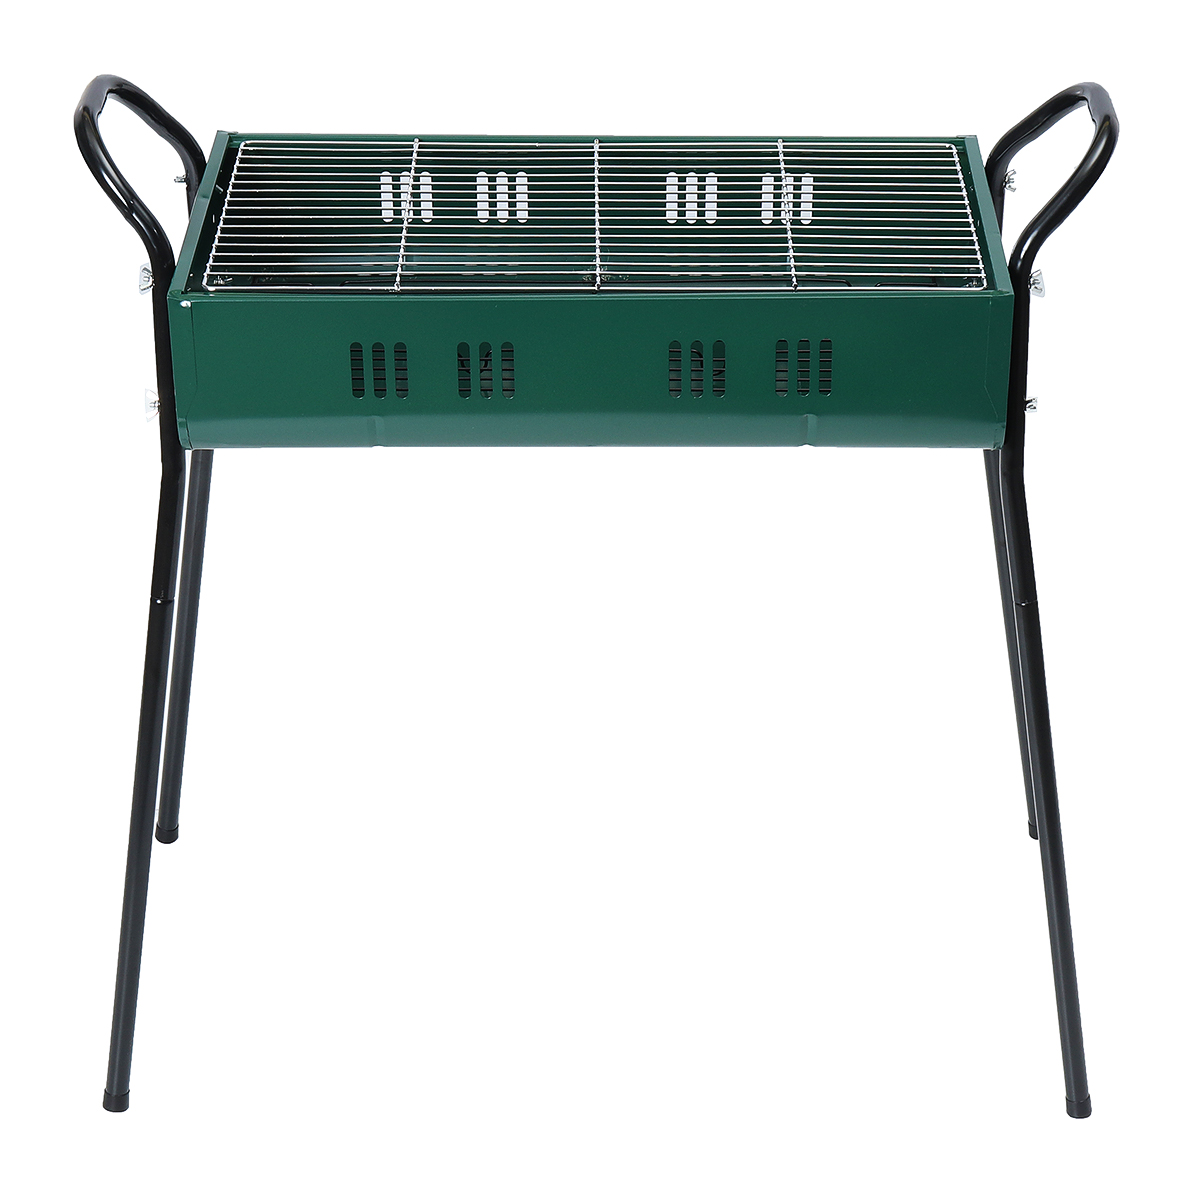 80x45x80cm-Portable-Charcoal-BBQ-Grill-Iron-Stove-Kebab-Barbecue-Patio-Camping-1697256-3